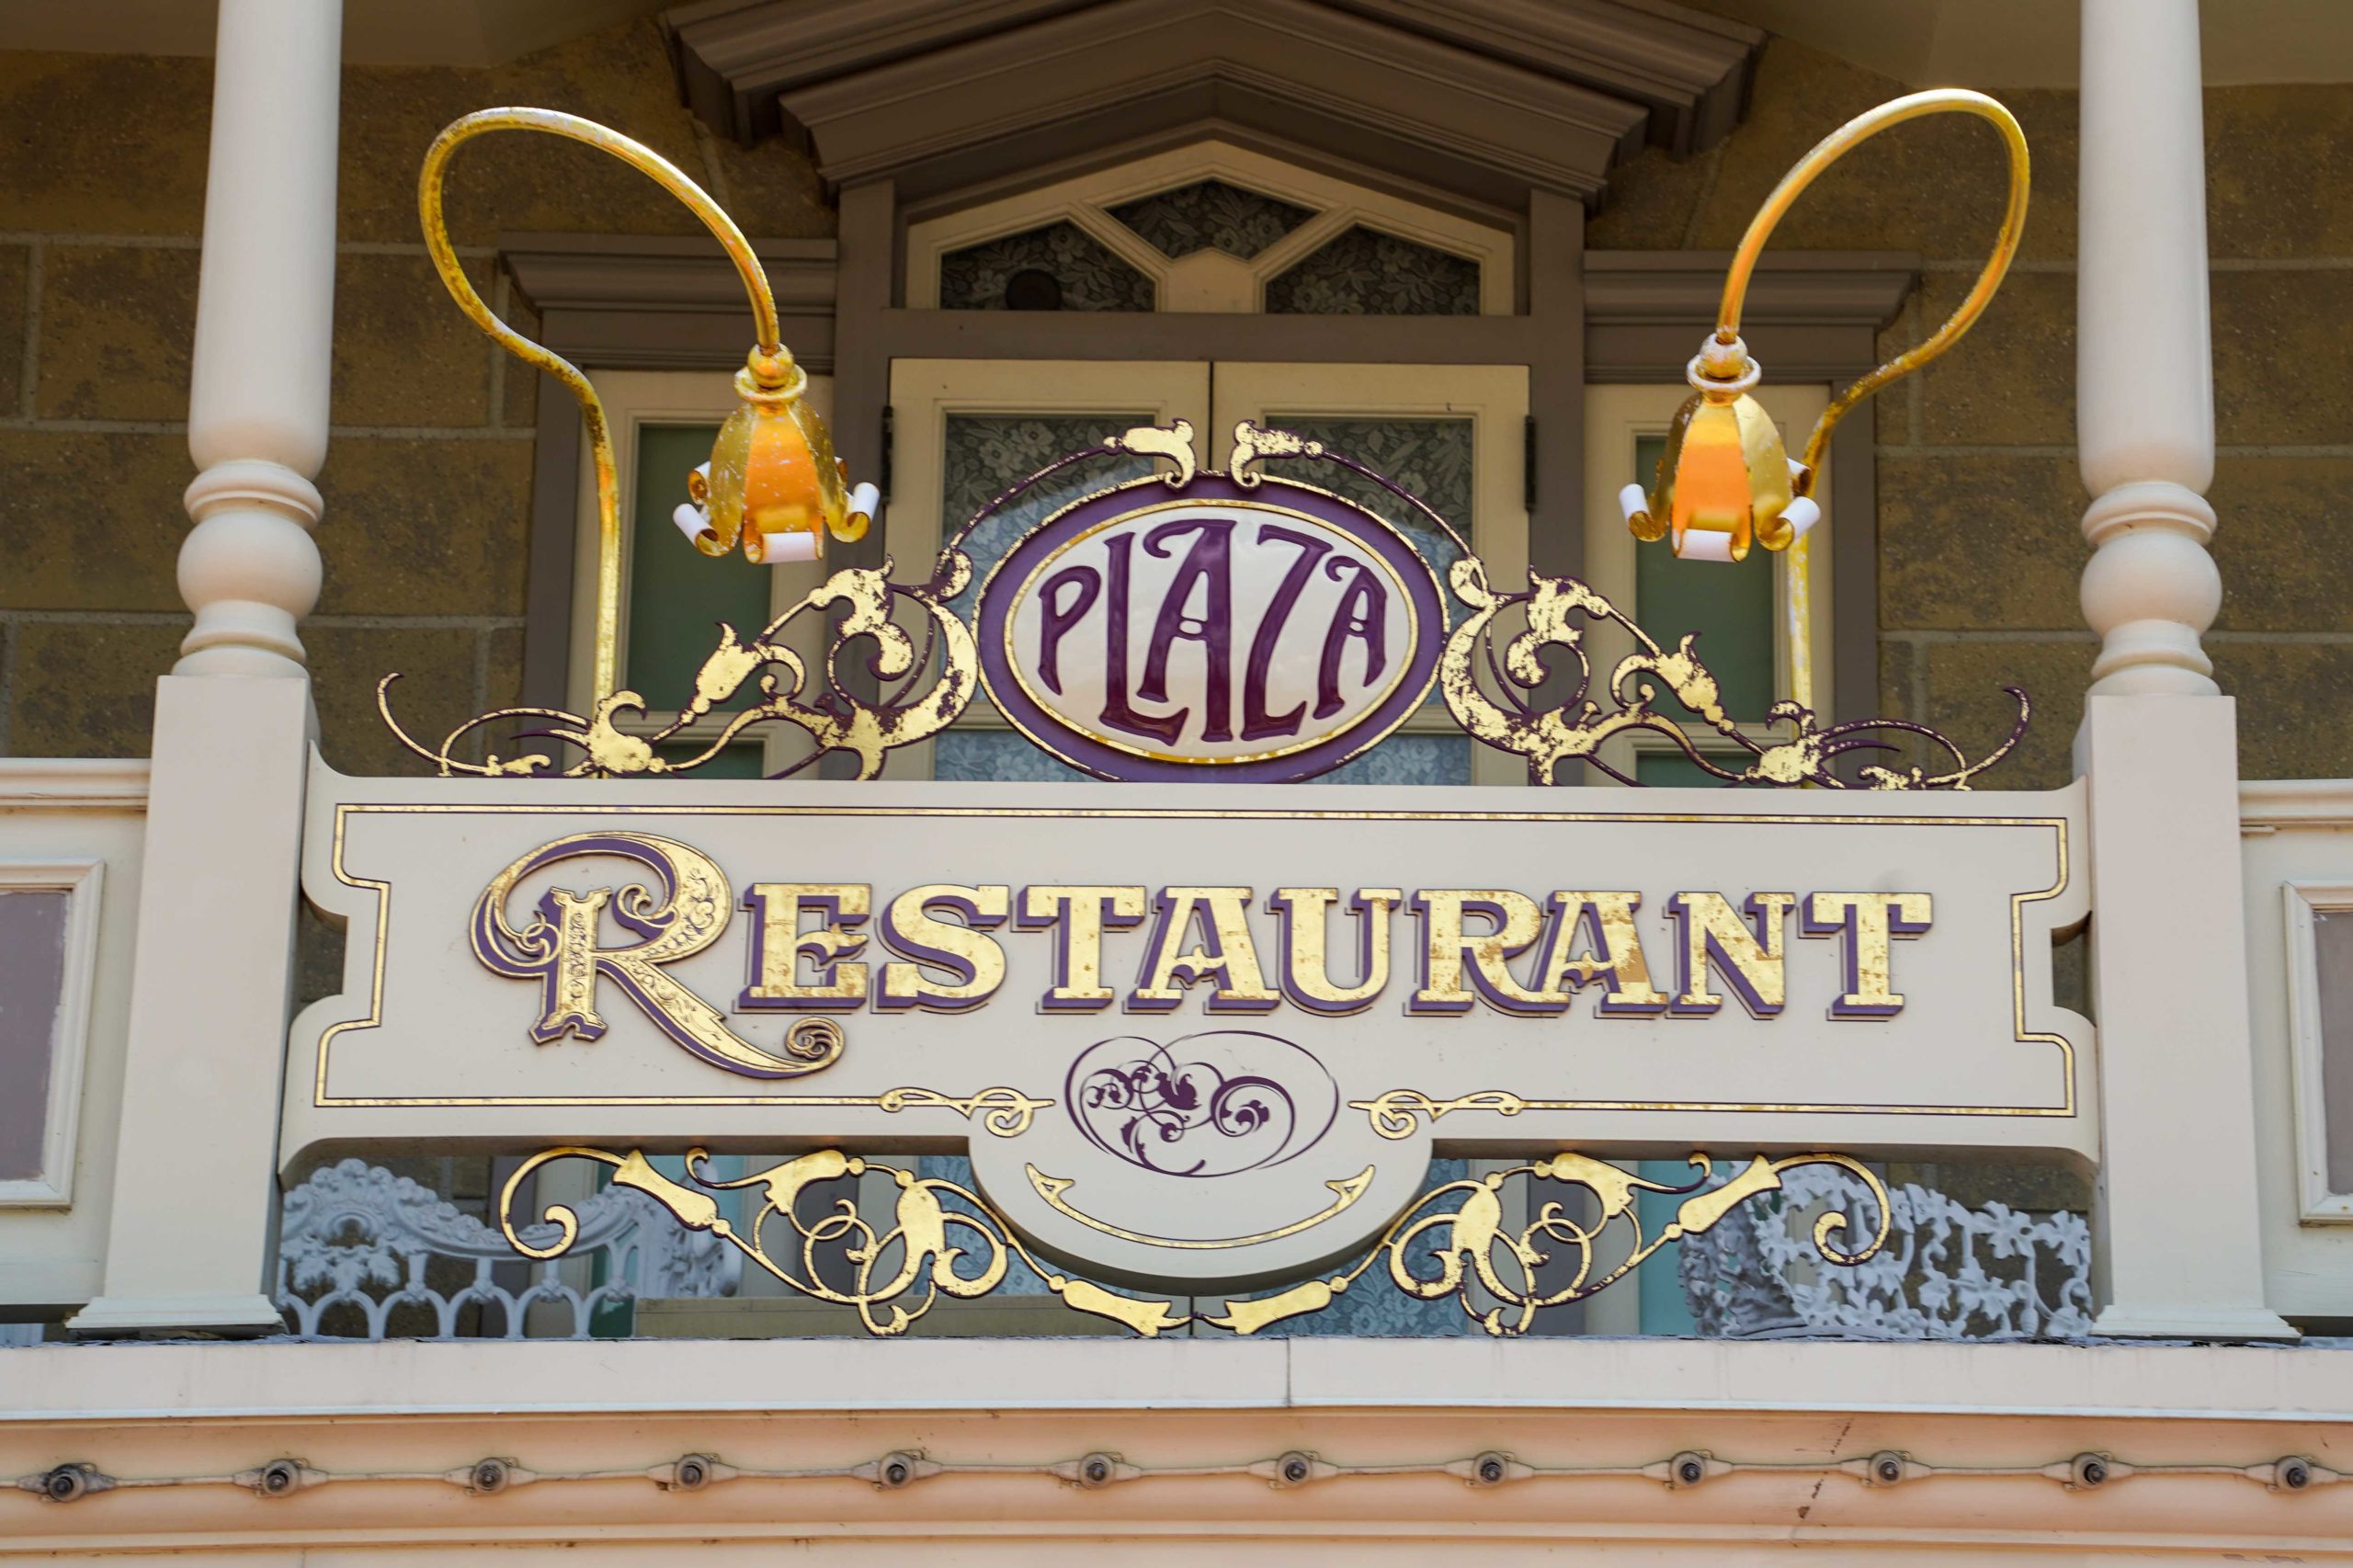 Disney Dining Plan Yet To Return To Walt Disney World 6 Months After Announcement Wdw News Today